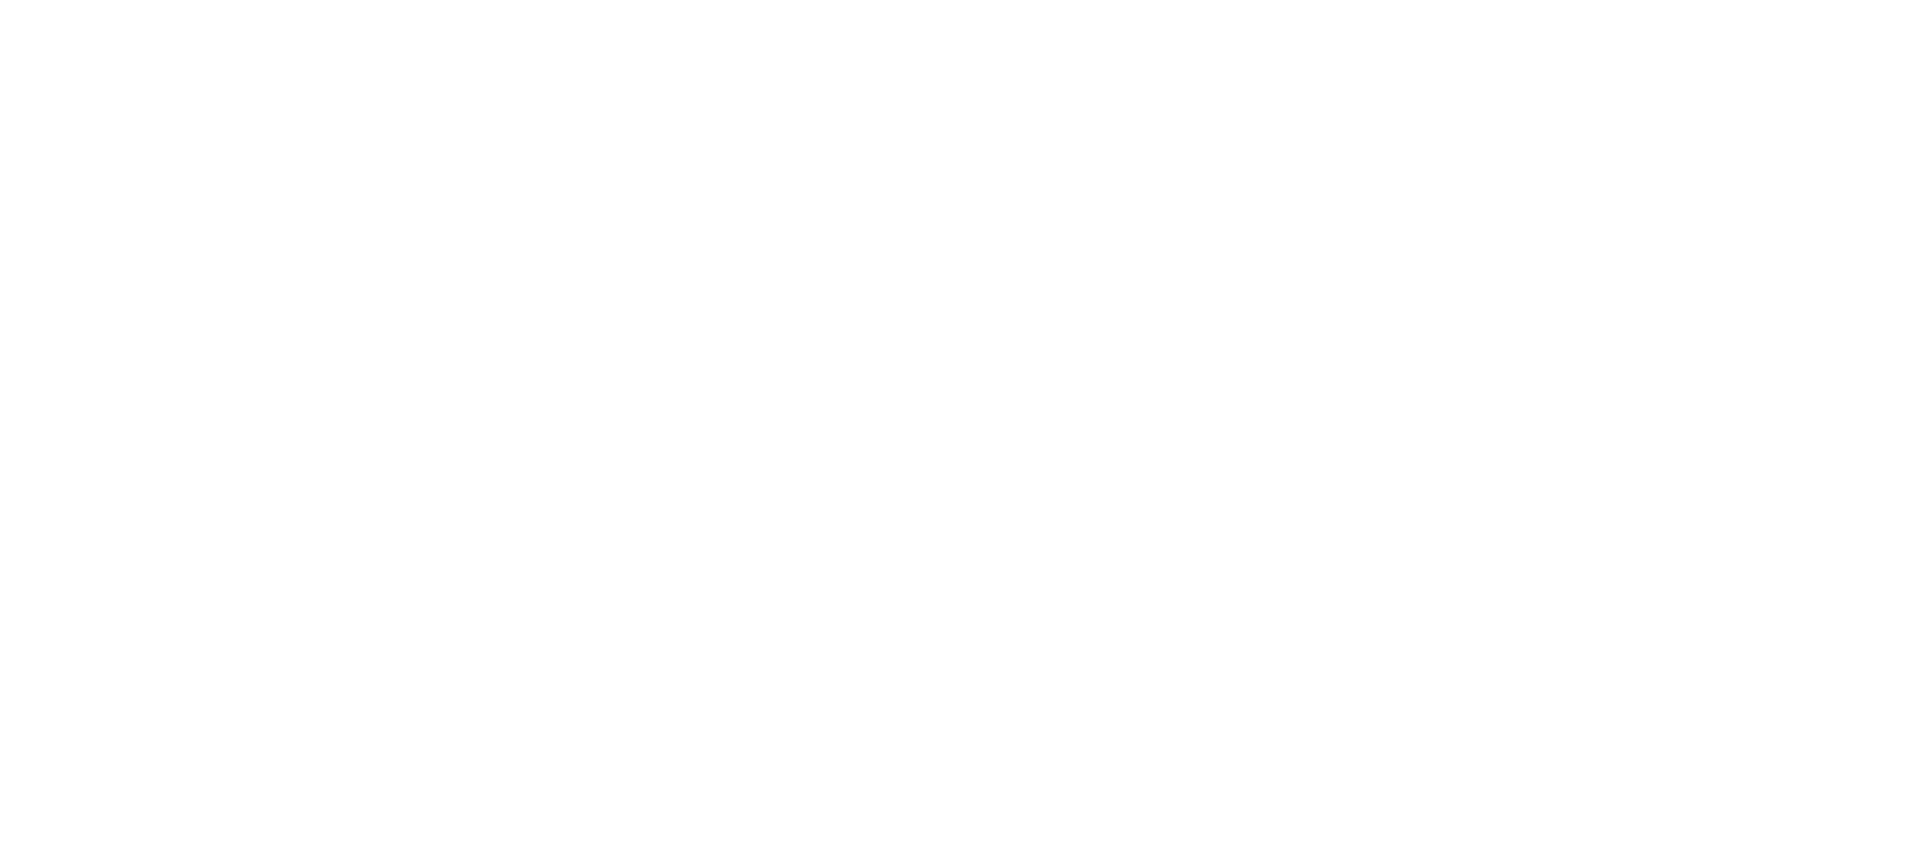 "A Book Like No Other"